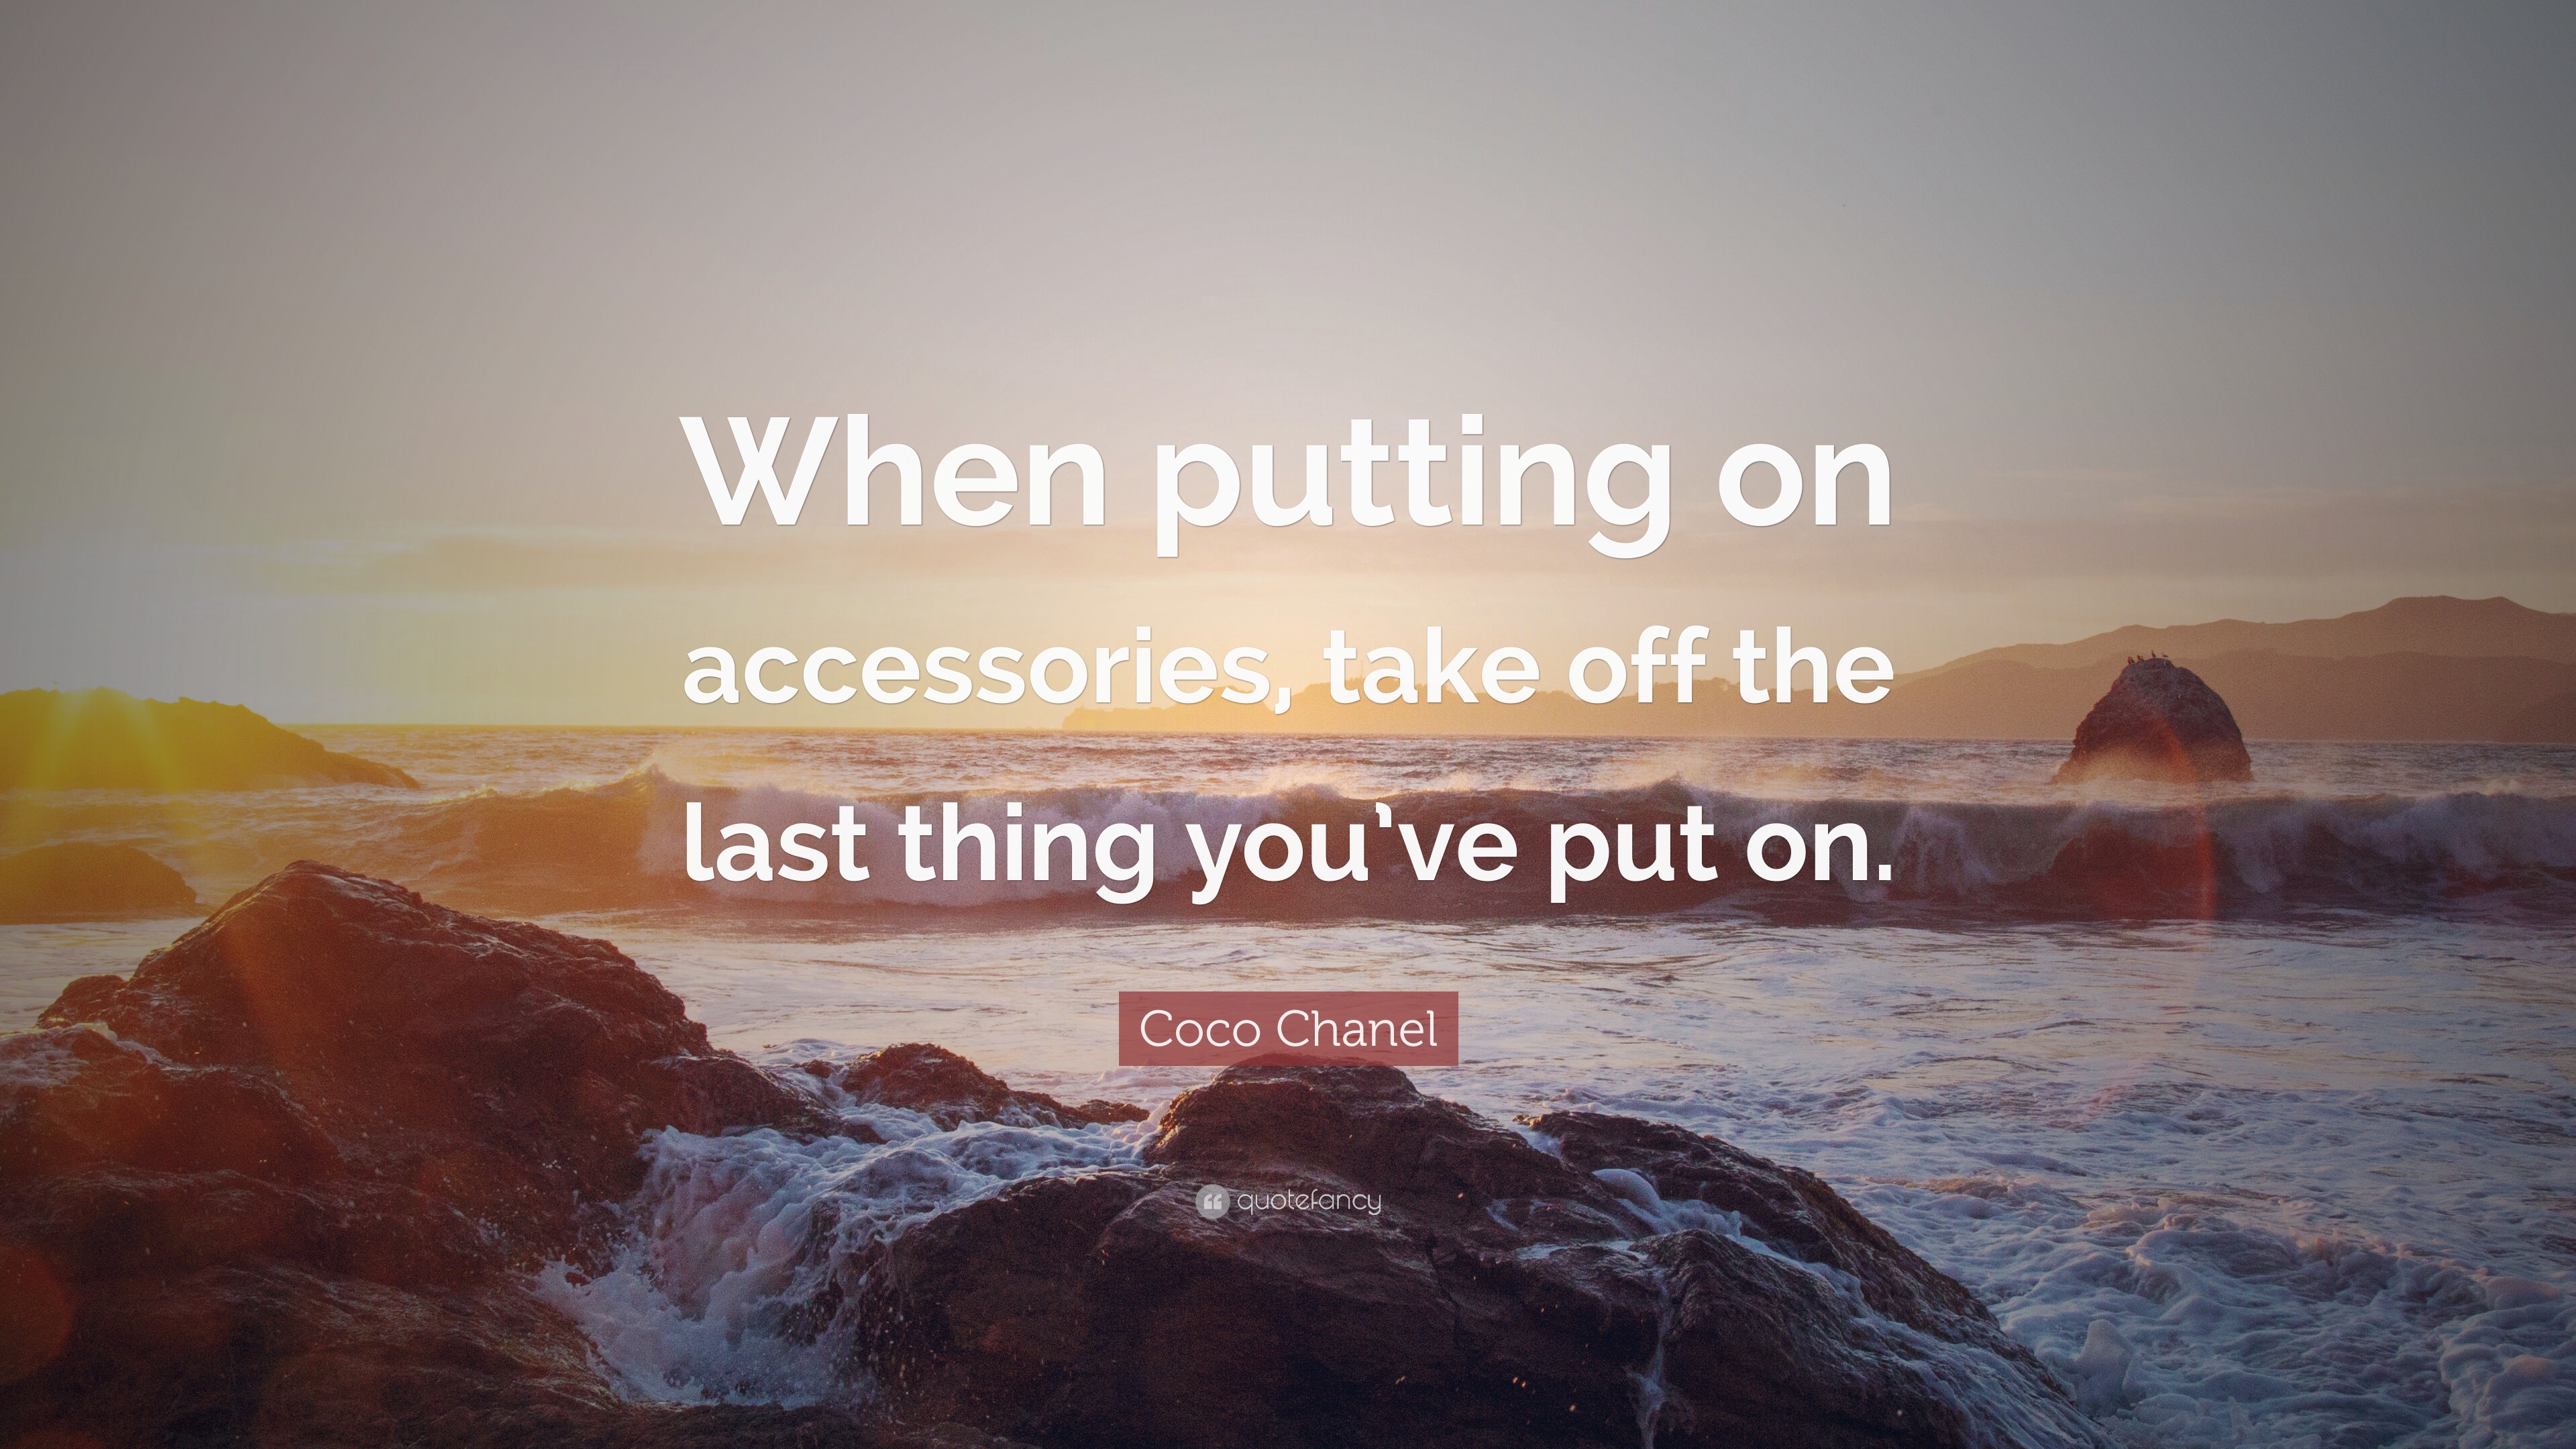 Coco Chanel Quote: “When putting on accessories, take off the last